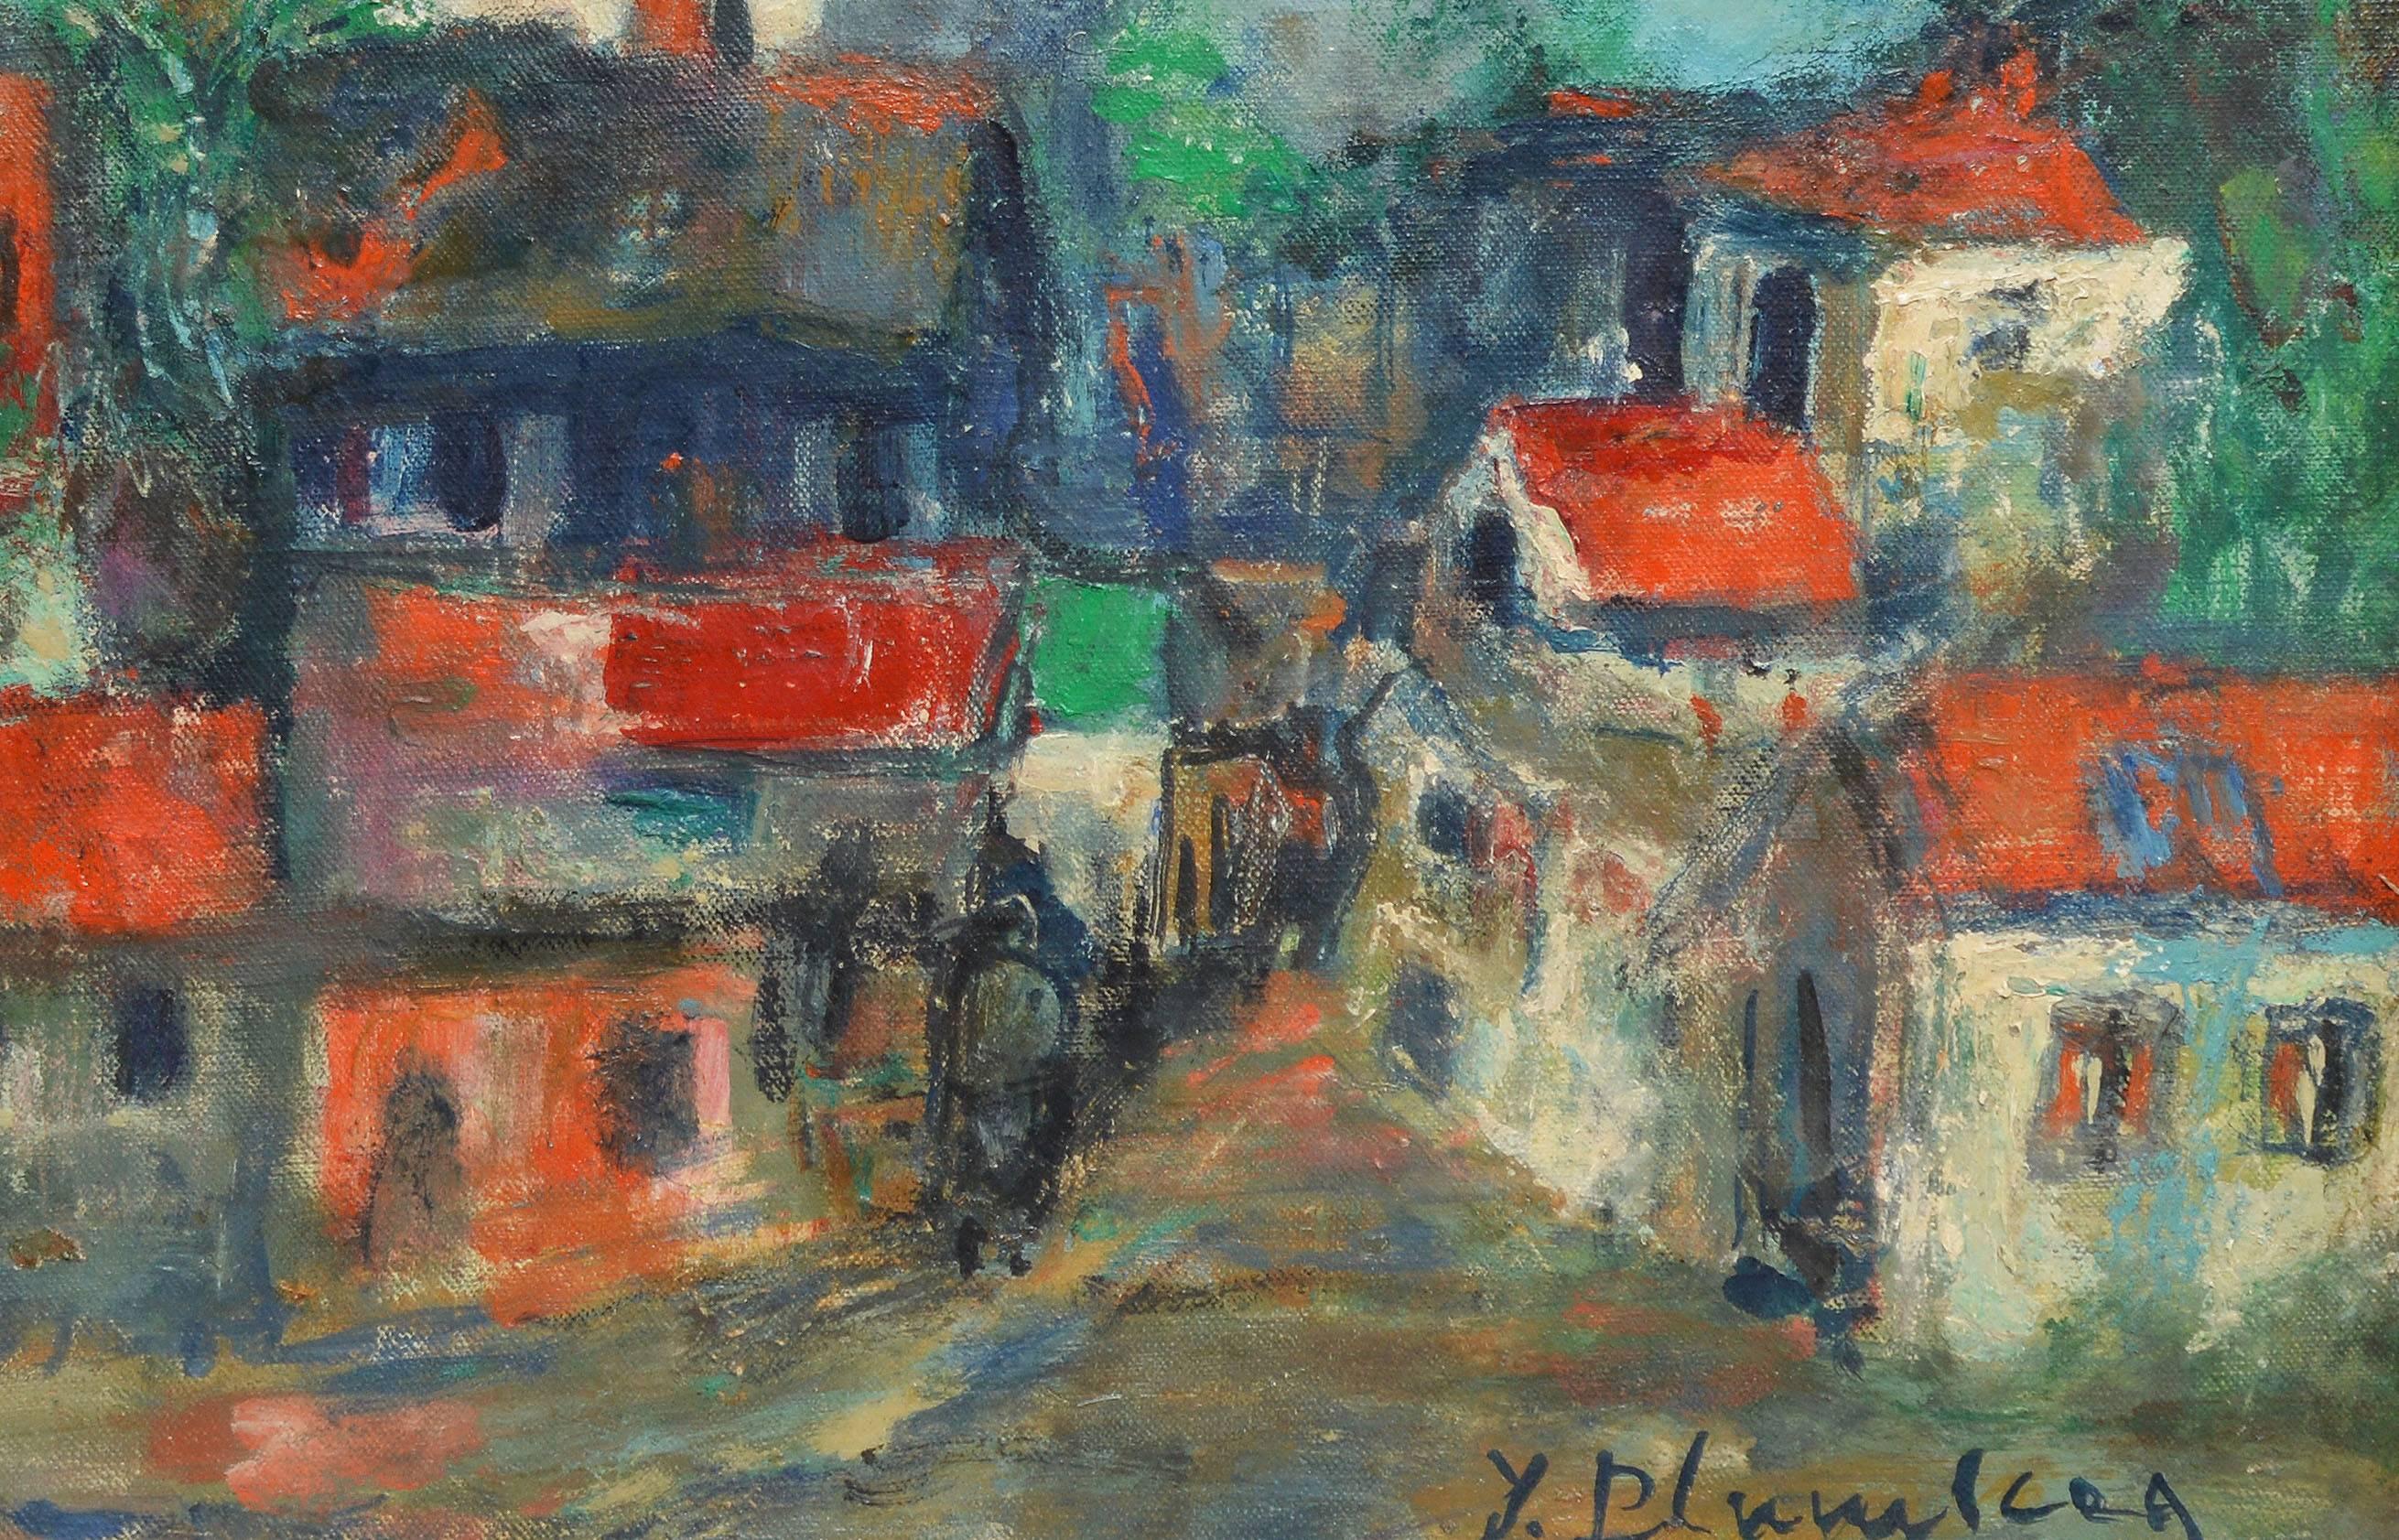 Modernist style view of a French town.  Oil on canvas, circa 1930.  Signed illegibly lower right.  Displayed in a grey modernist frame.  Image size, 14"L x 11"H, overall 17"L x 14"H.